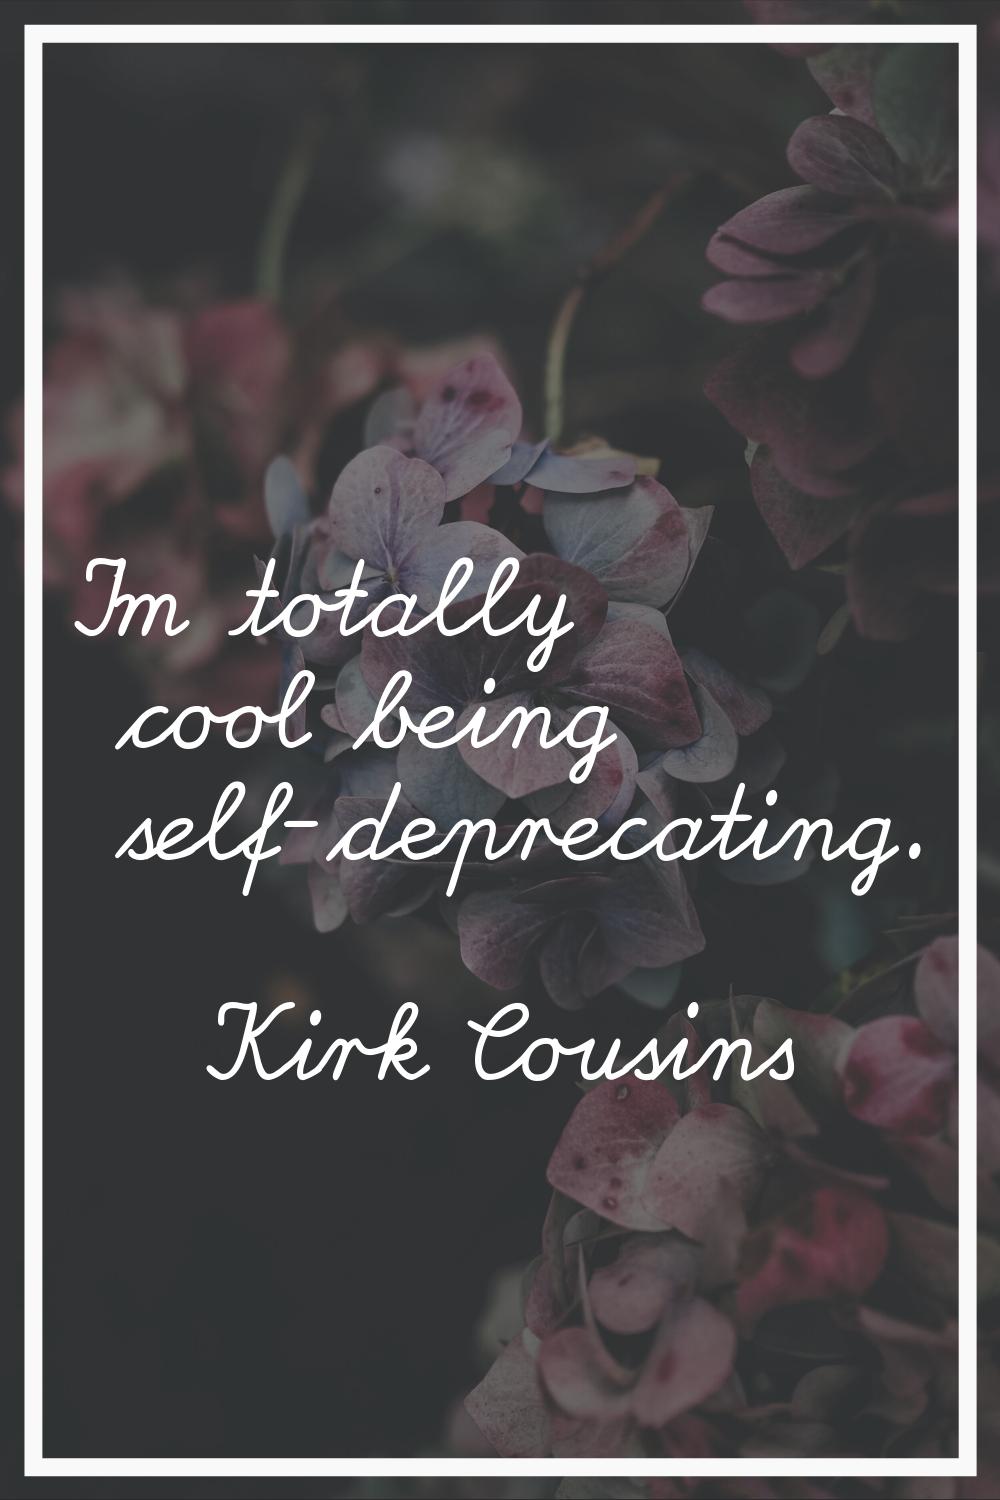 I'm totally cool being self-deprecating.